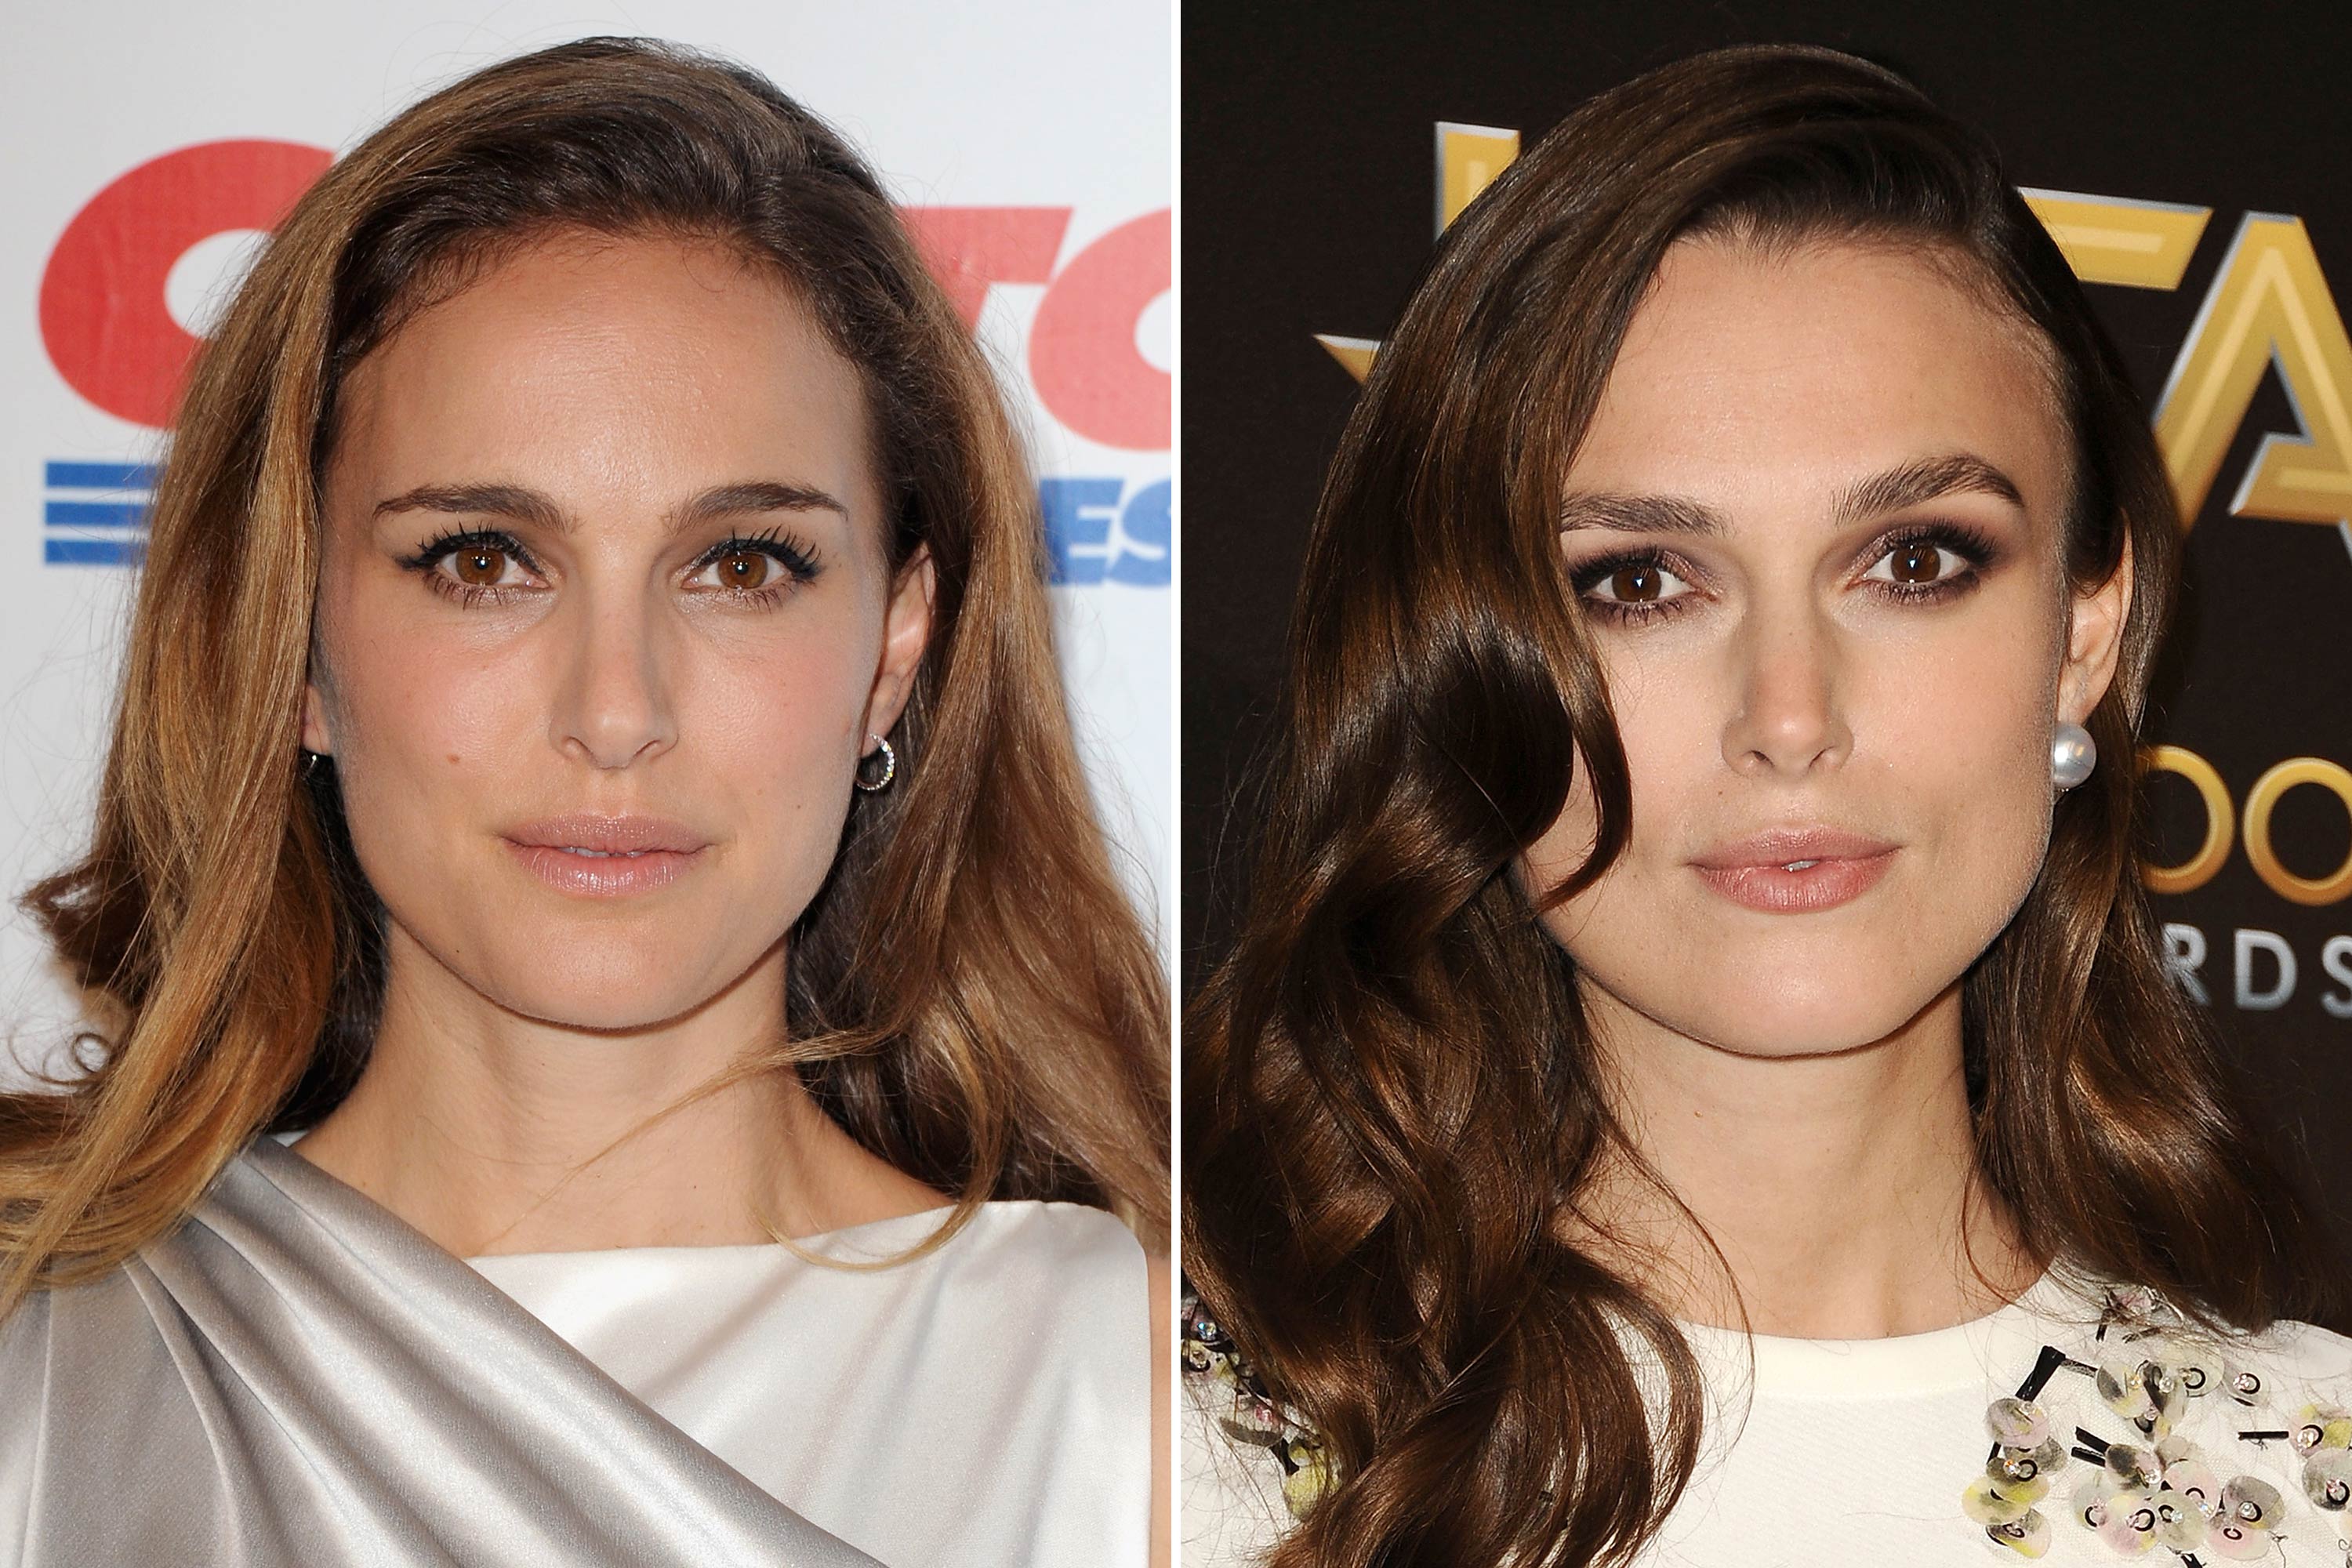 Photos of Celebrities Who Look Uncannily Alike | Time